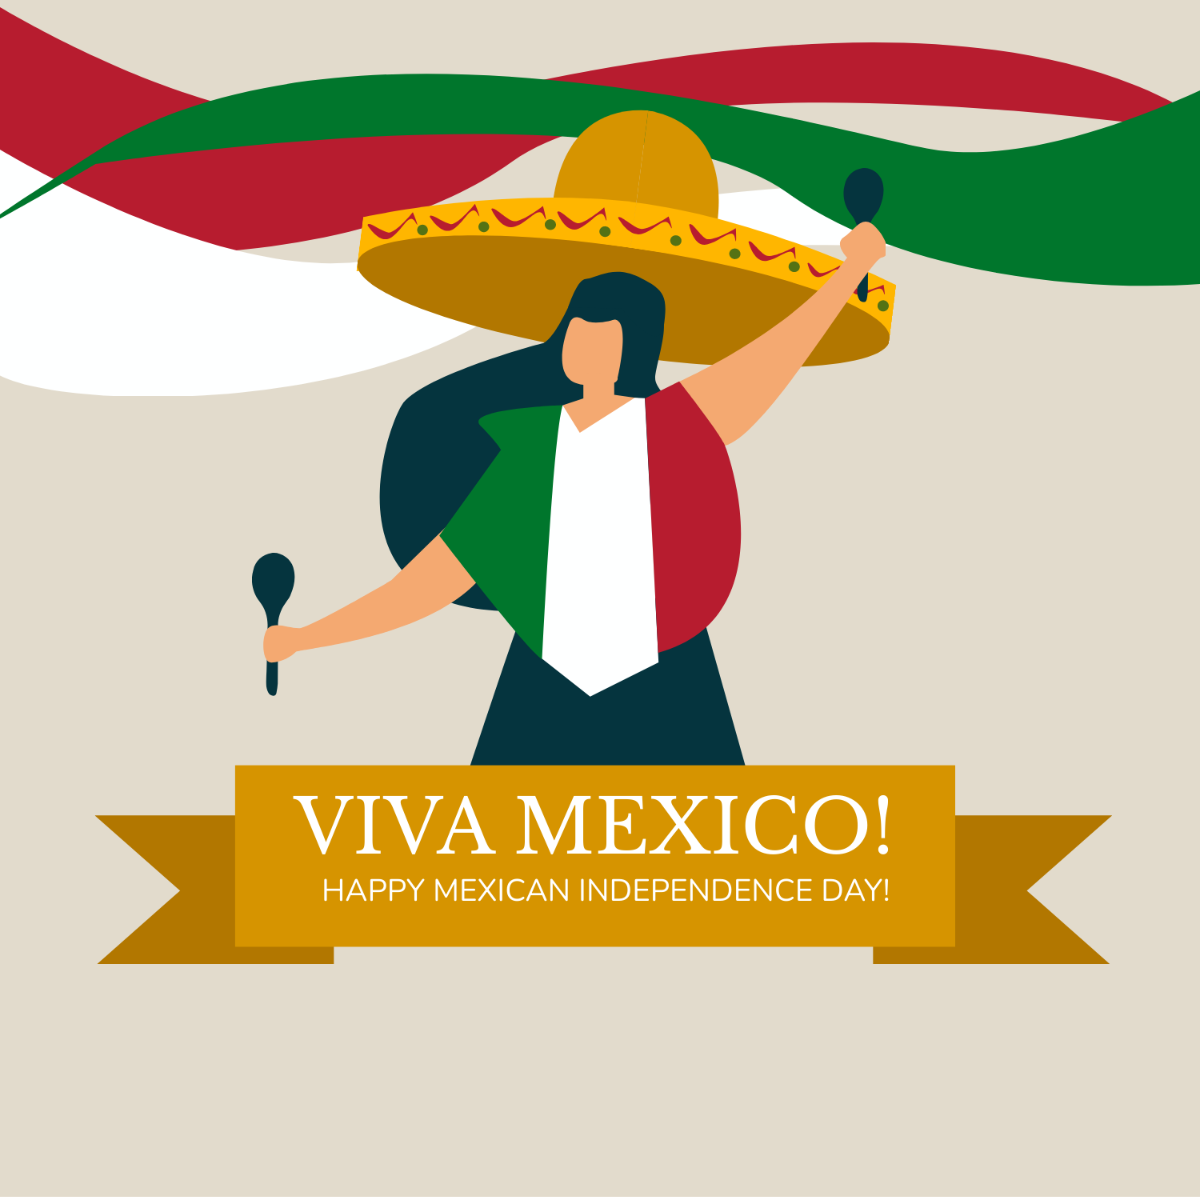 Free Happy Mexican Independence Day Illustration Template